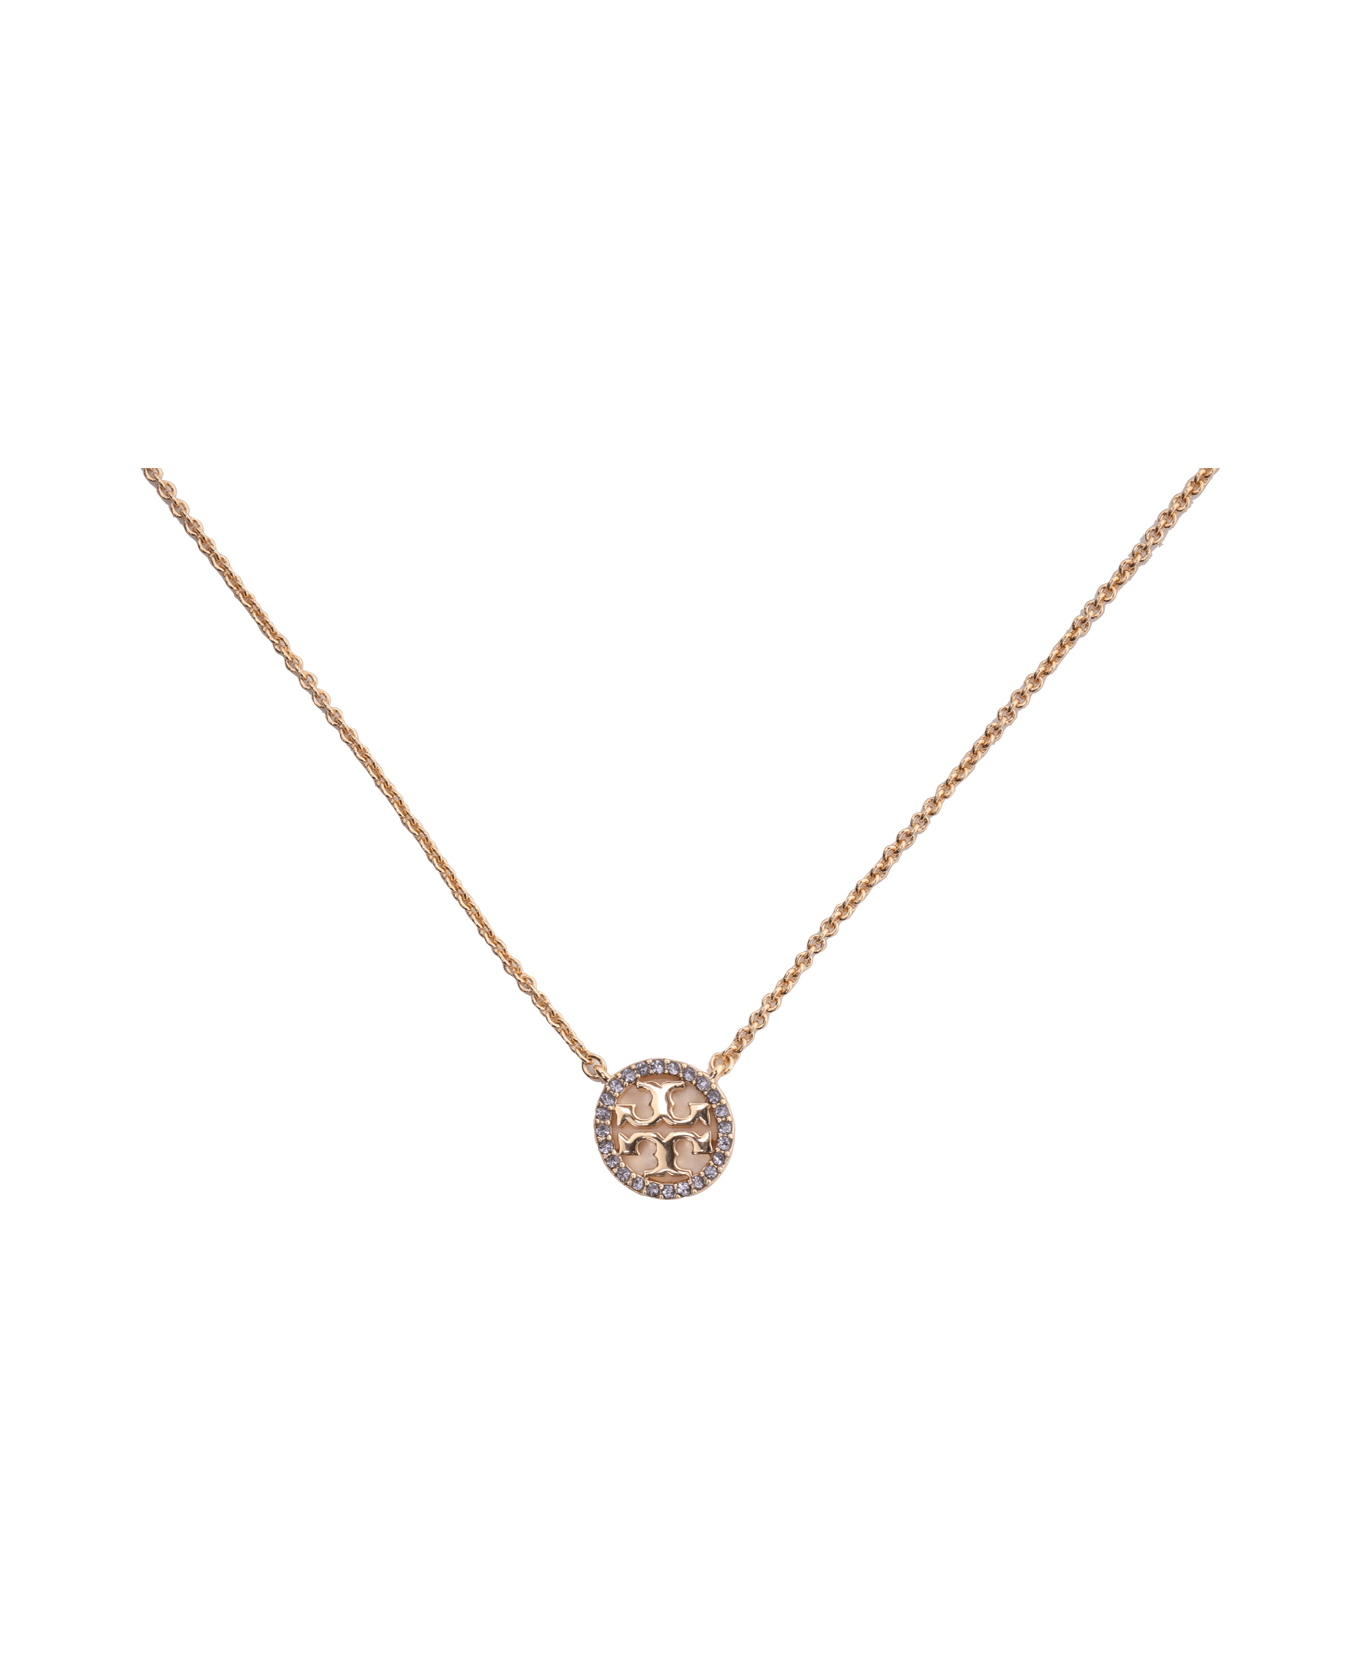 Tory Burch Miller Pave Pendant Necklace - Golden ネックレス